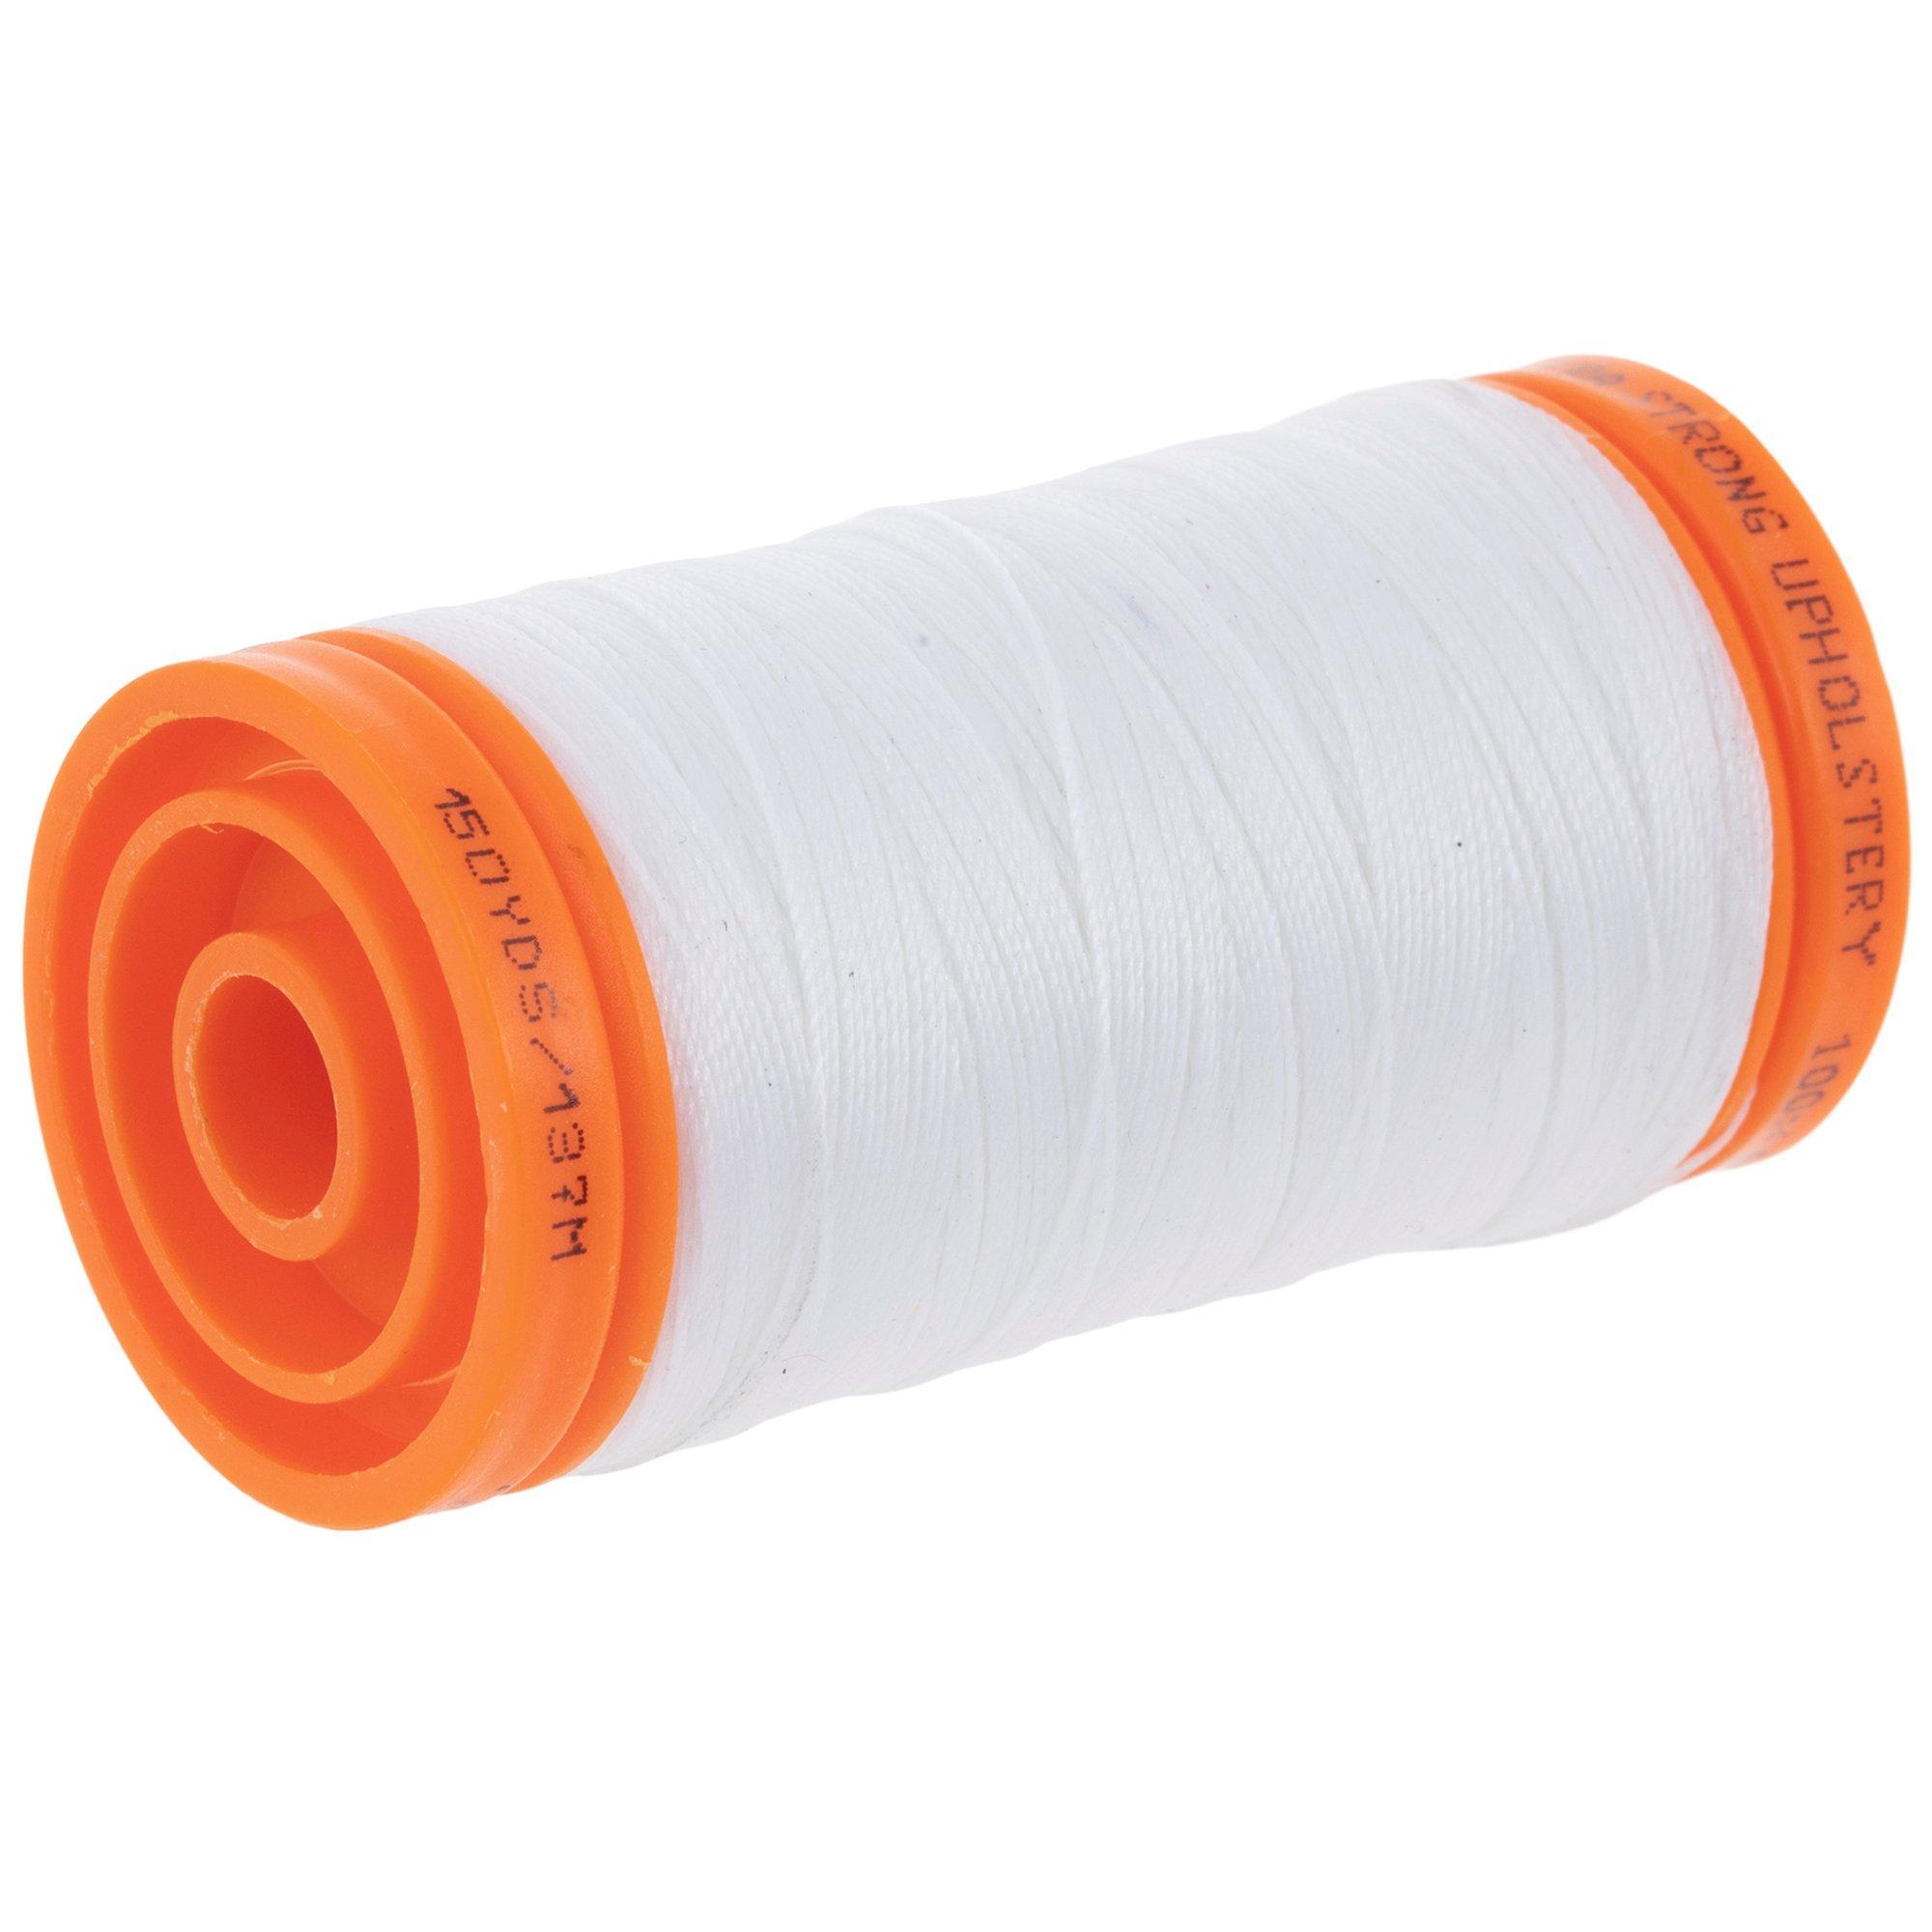 Singer All-Purpose Polyester Thread 150yd-White